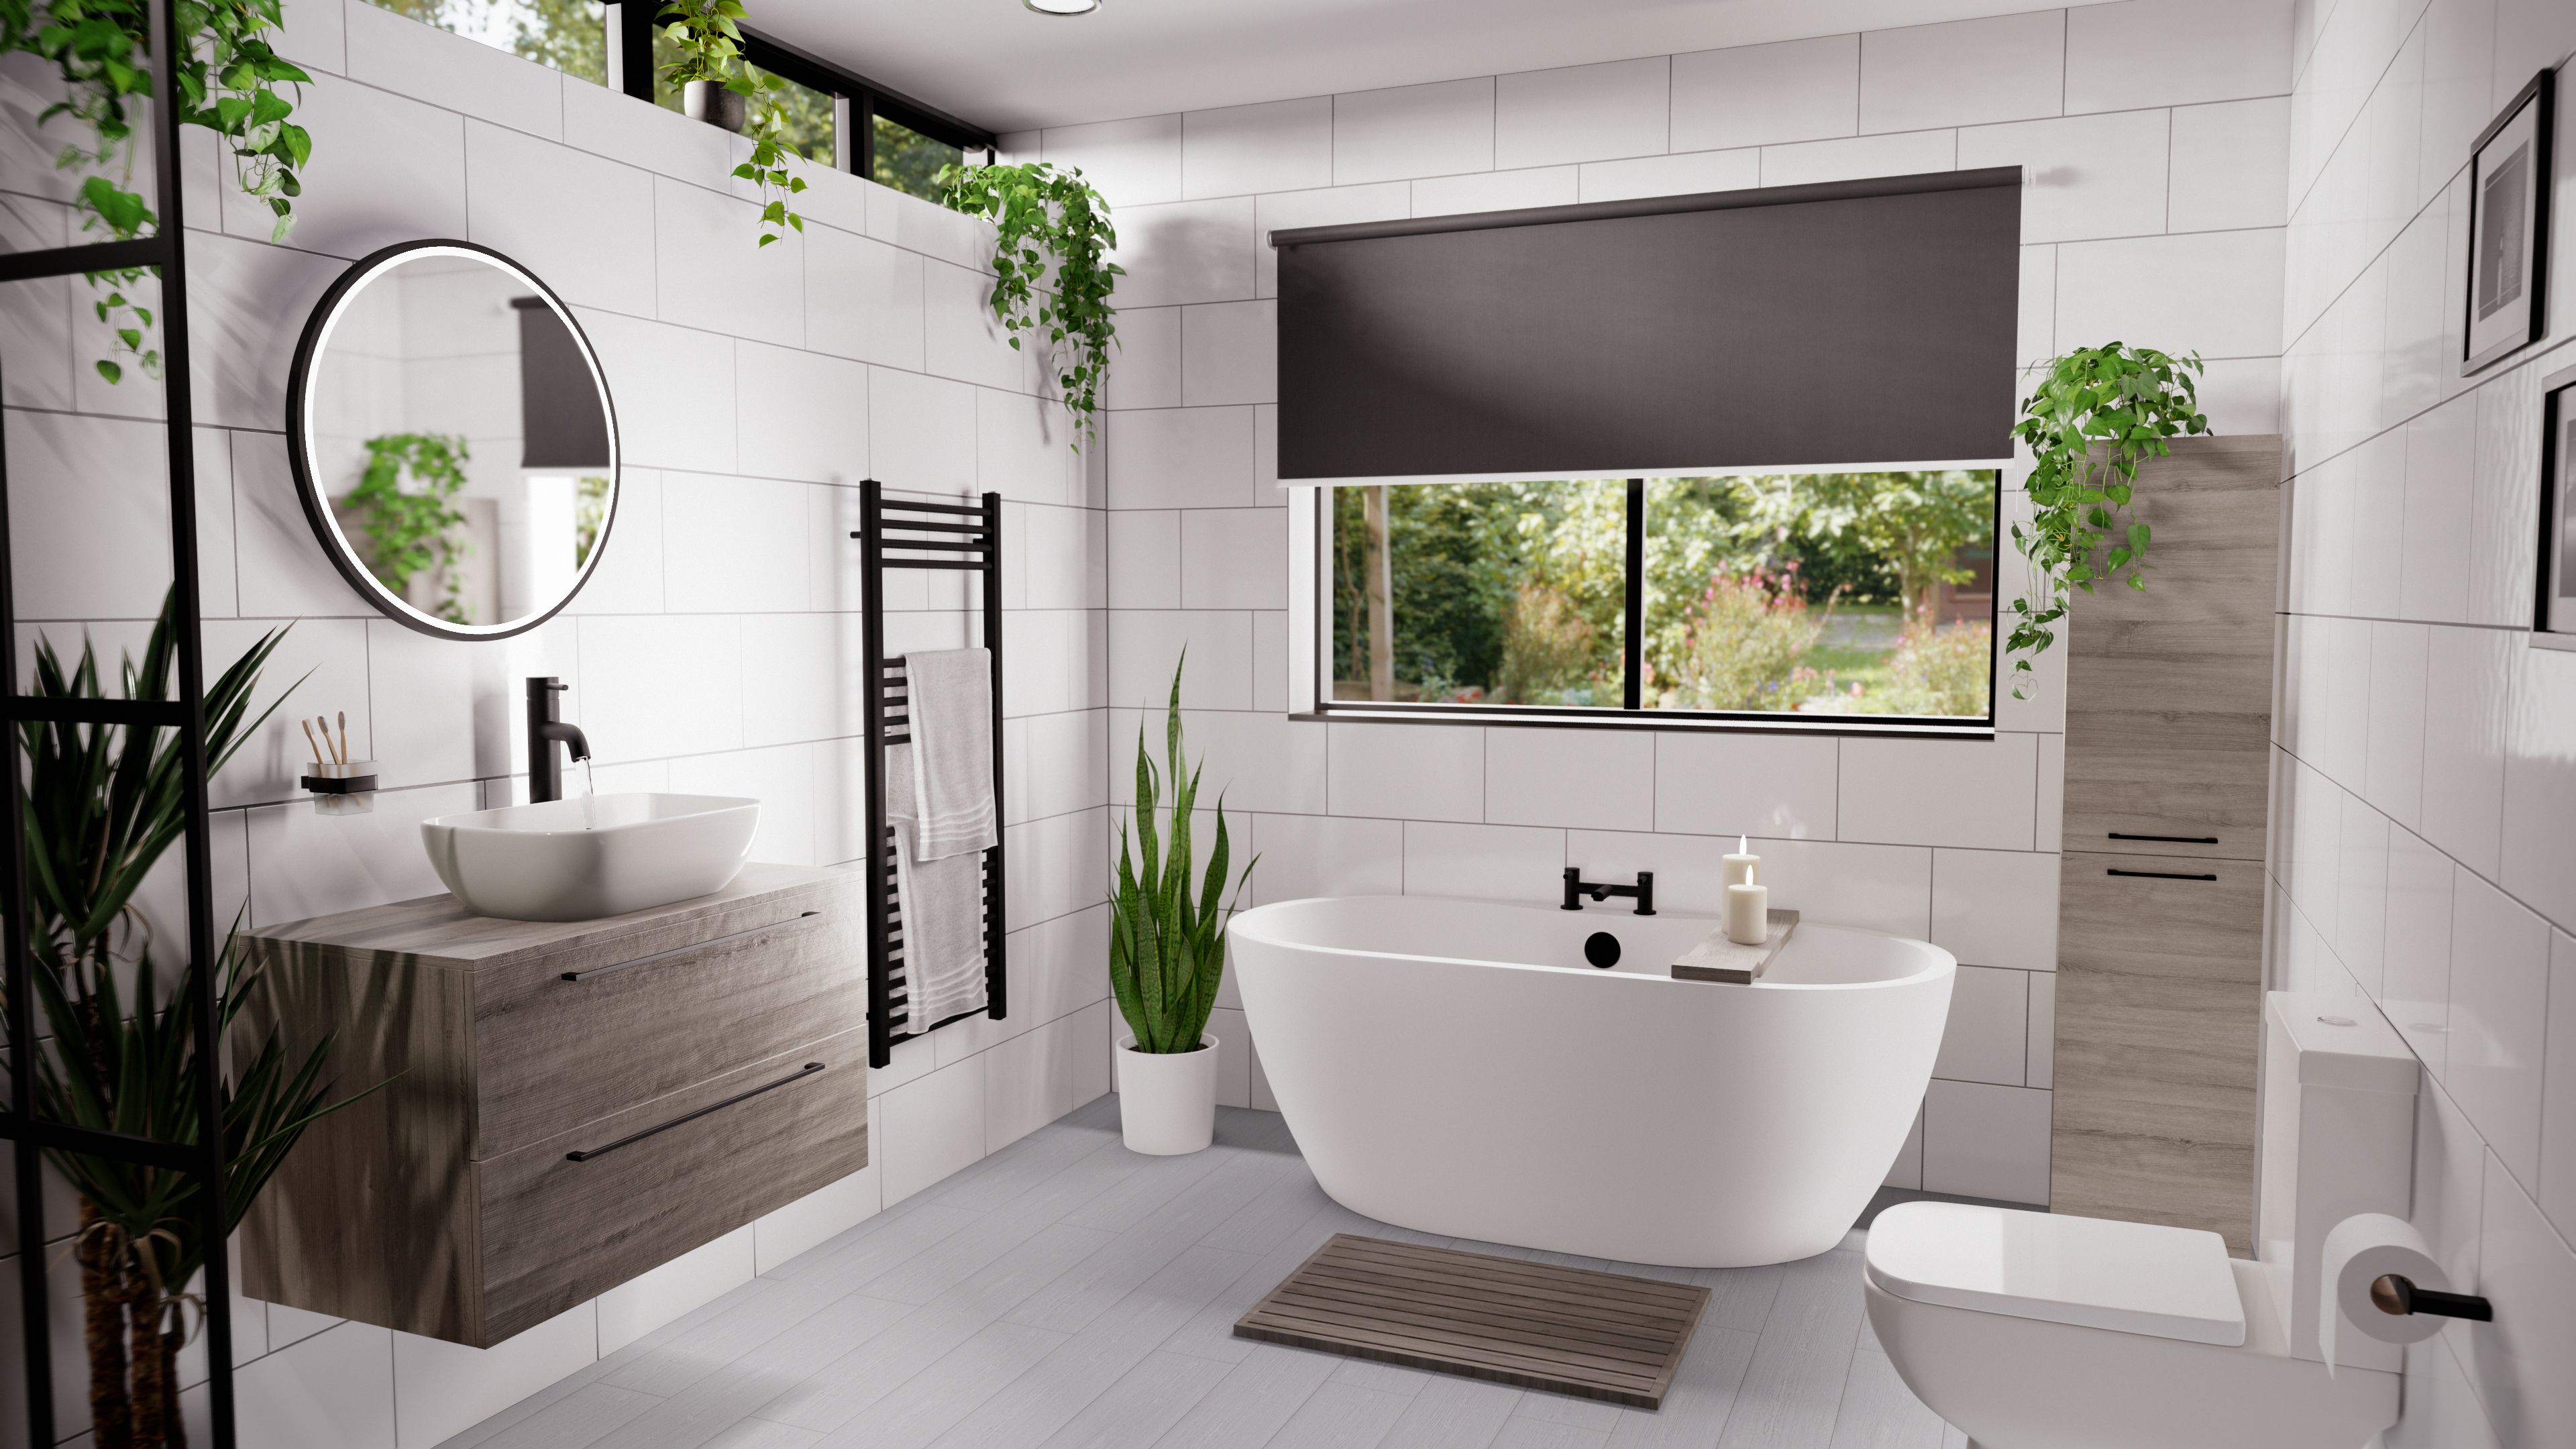 White tiled bathroom with toilet, bath, vanity unit and basin with greenery throughout